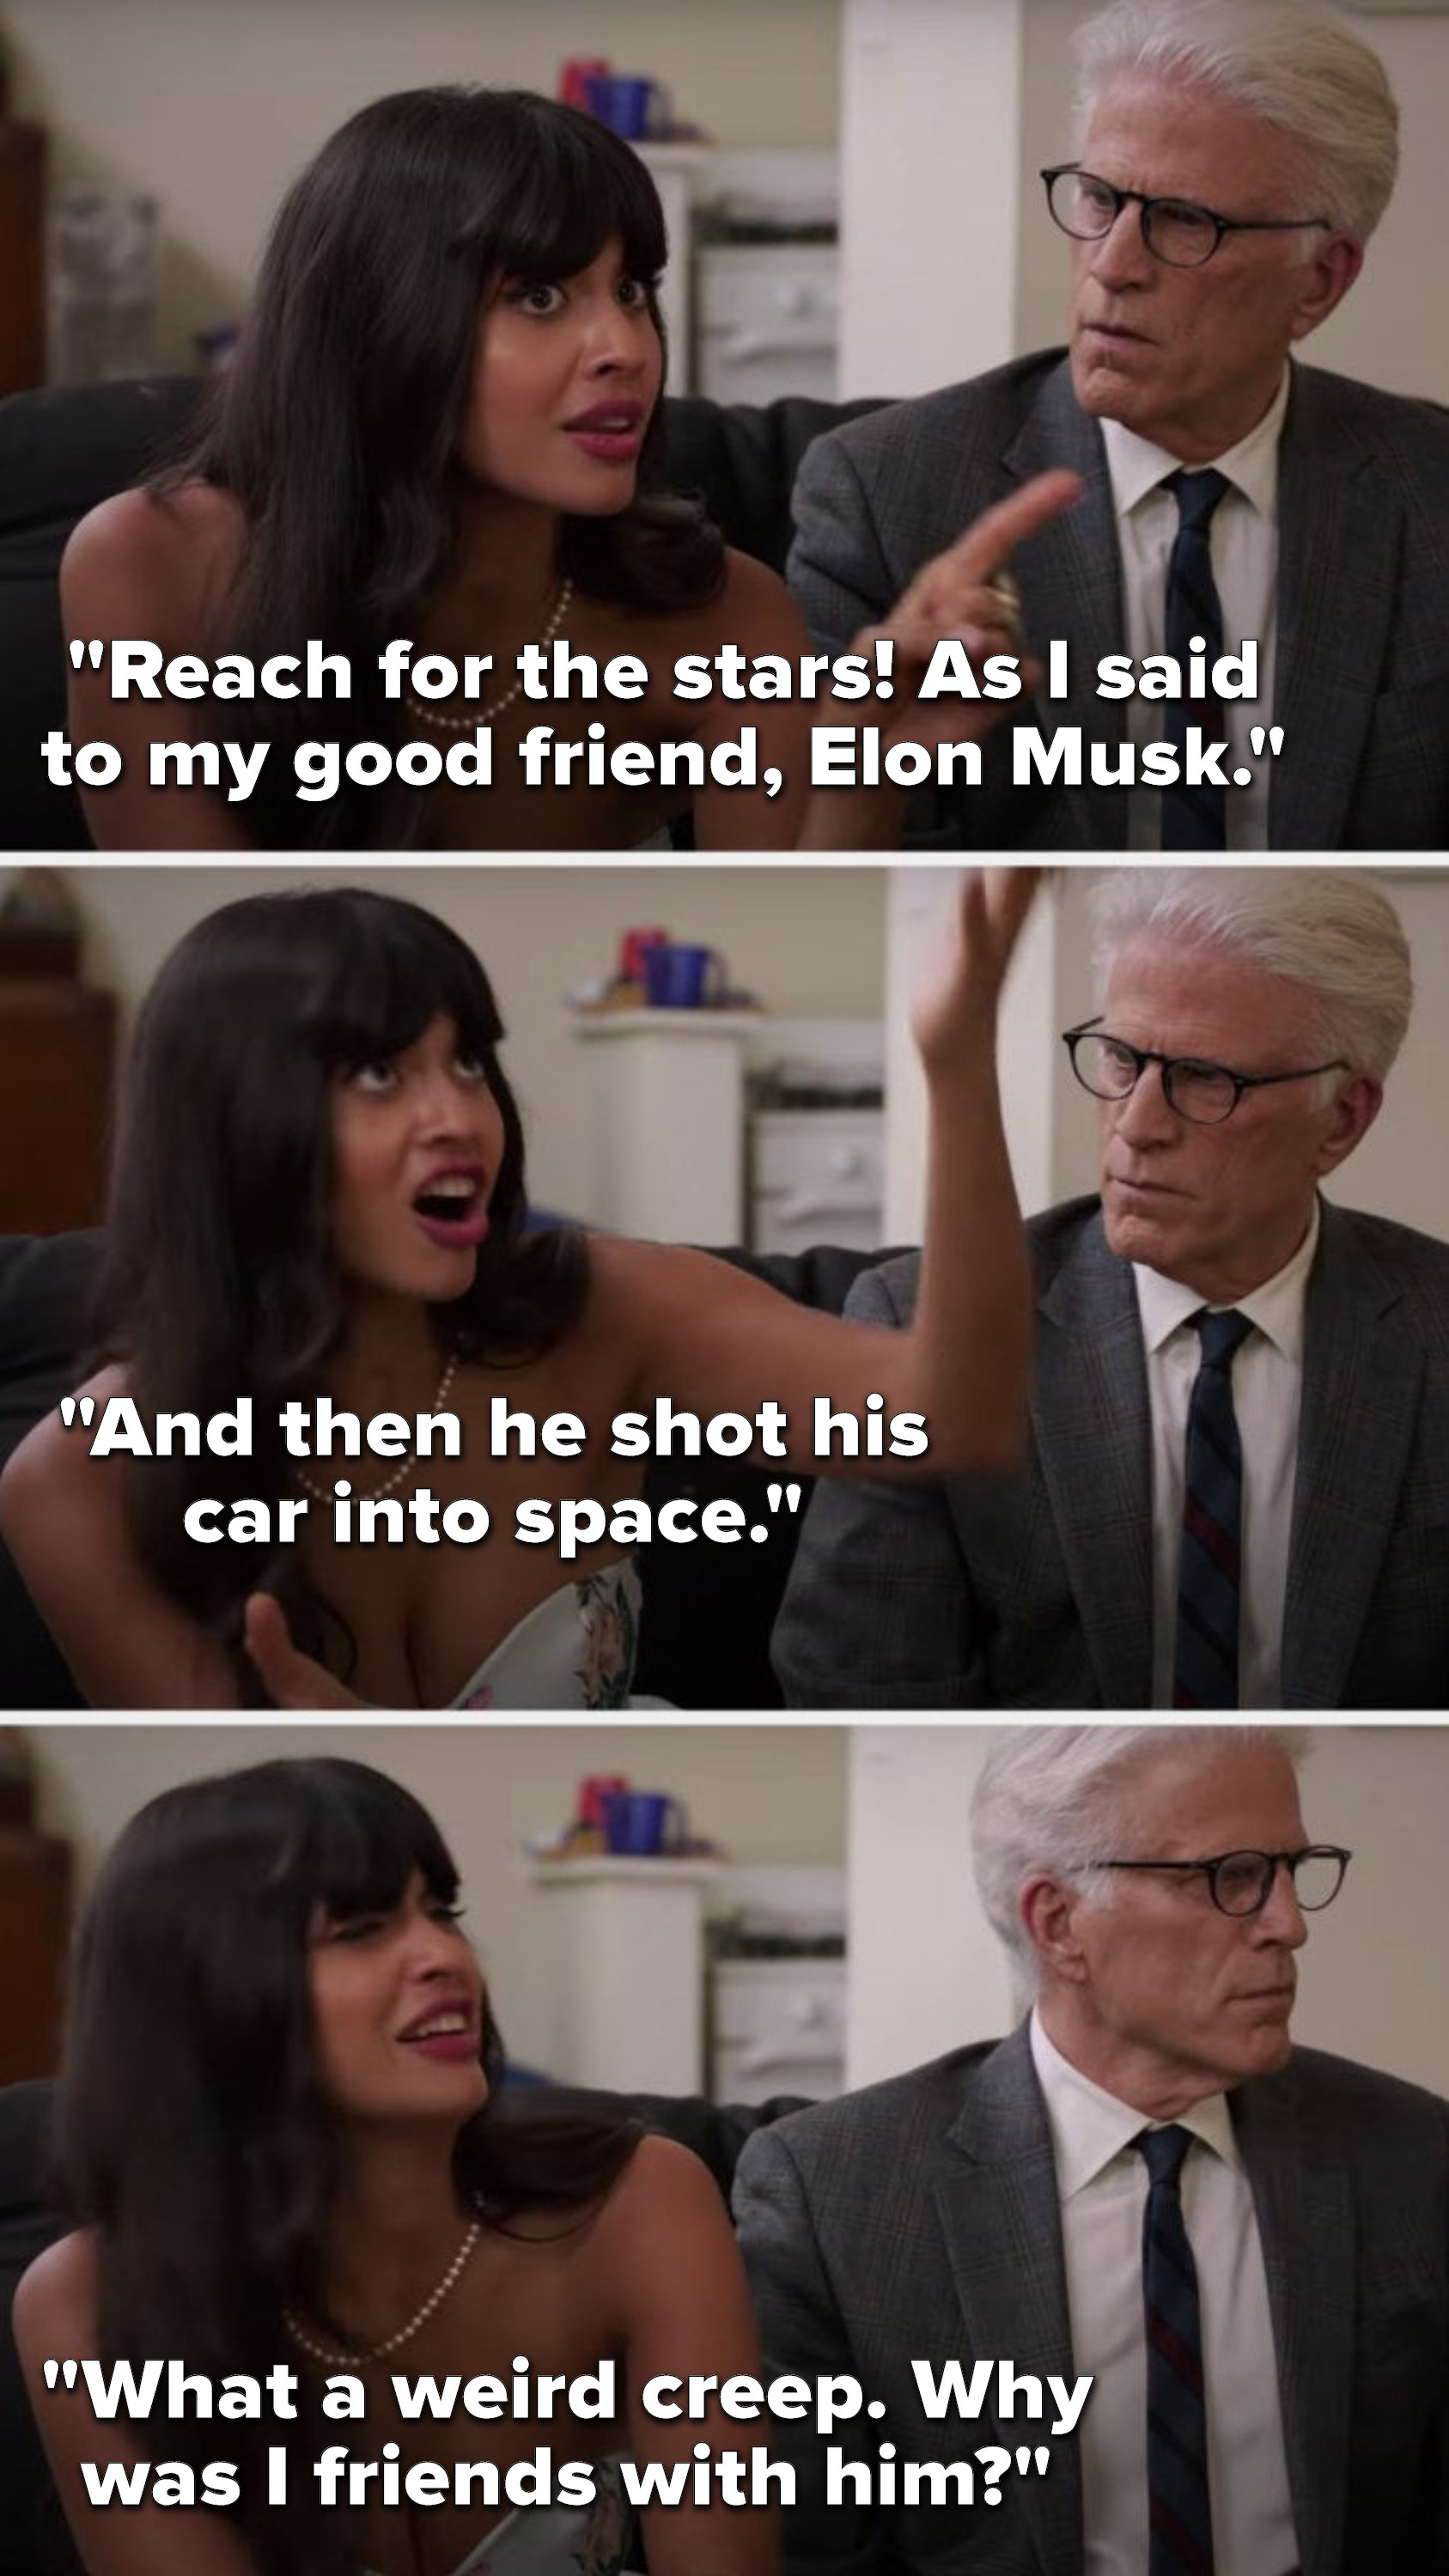 Tahani says, Reach for the stars, as I said to my good friend, Elon Musk, and then he shot his car into space, what a weird creep, why was I friends with him